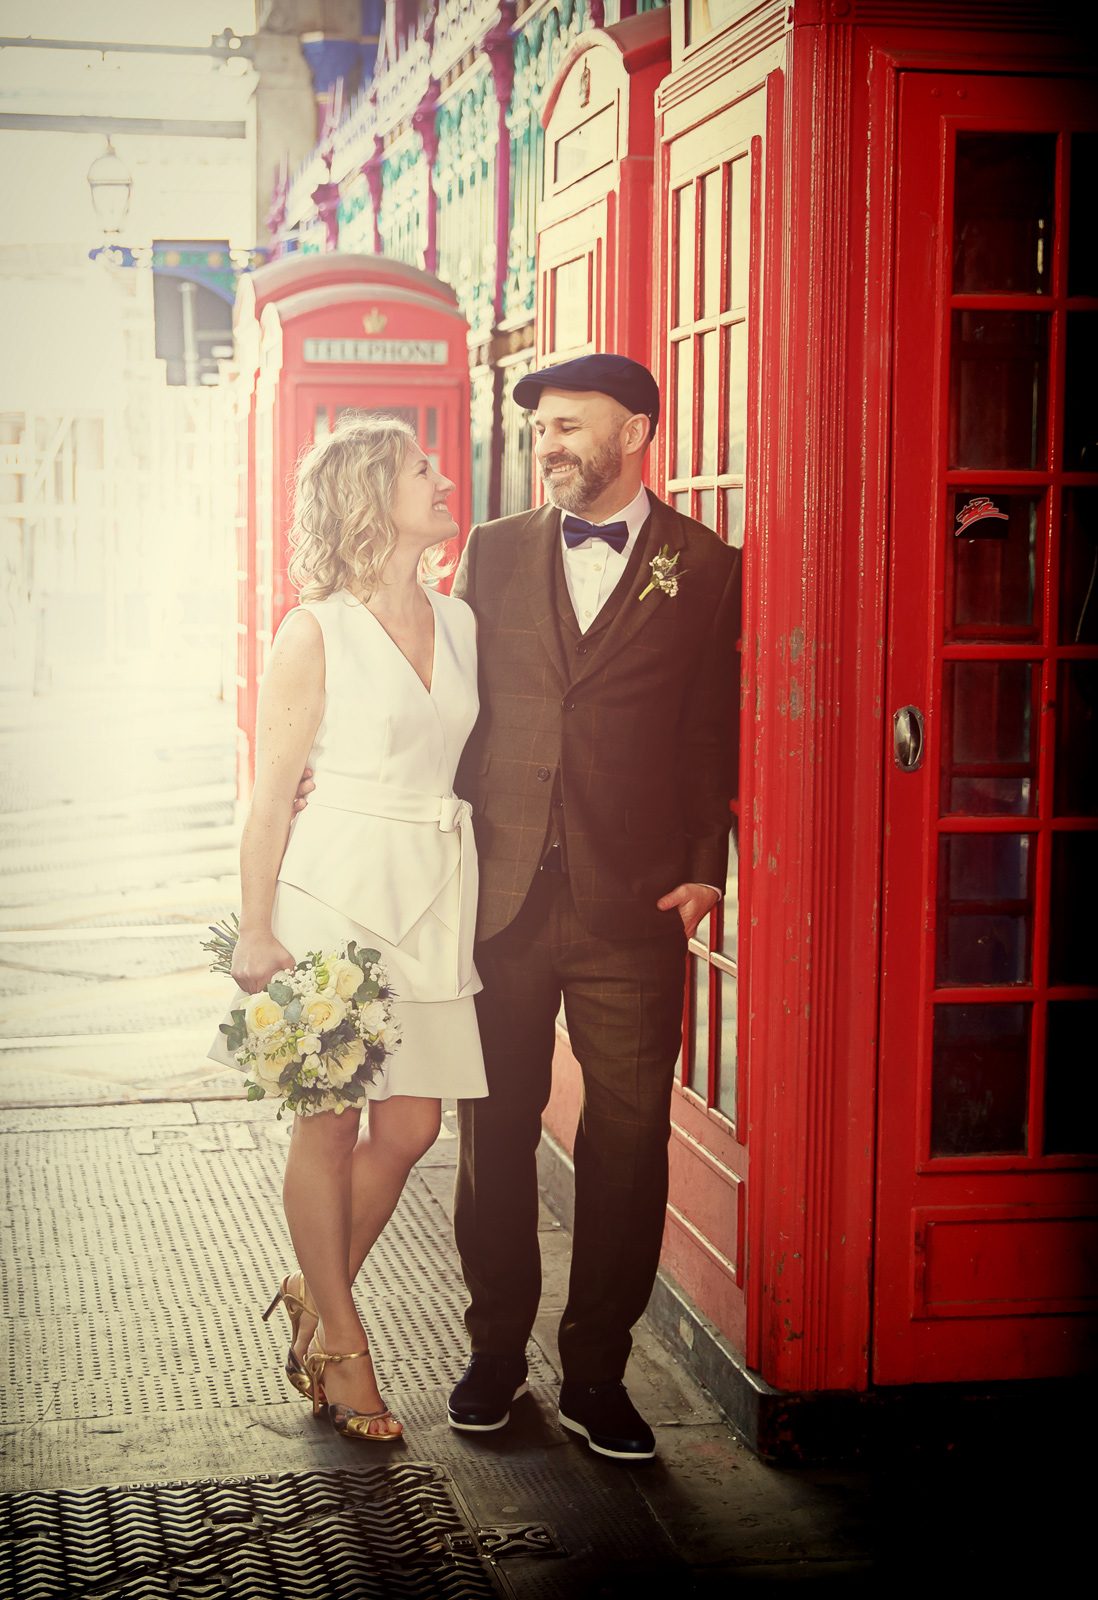 London Smithfield wedding day by phone boxes